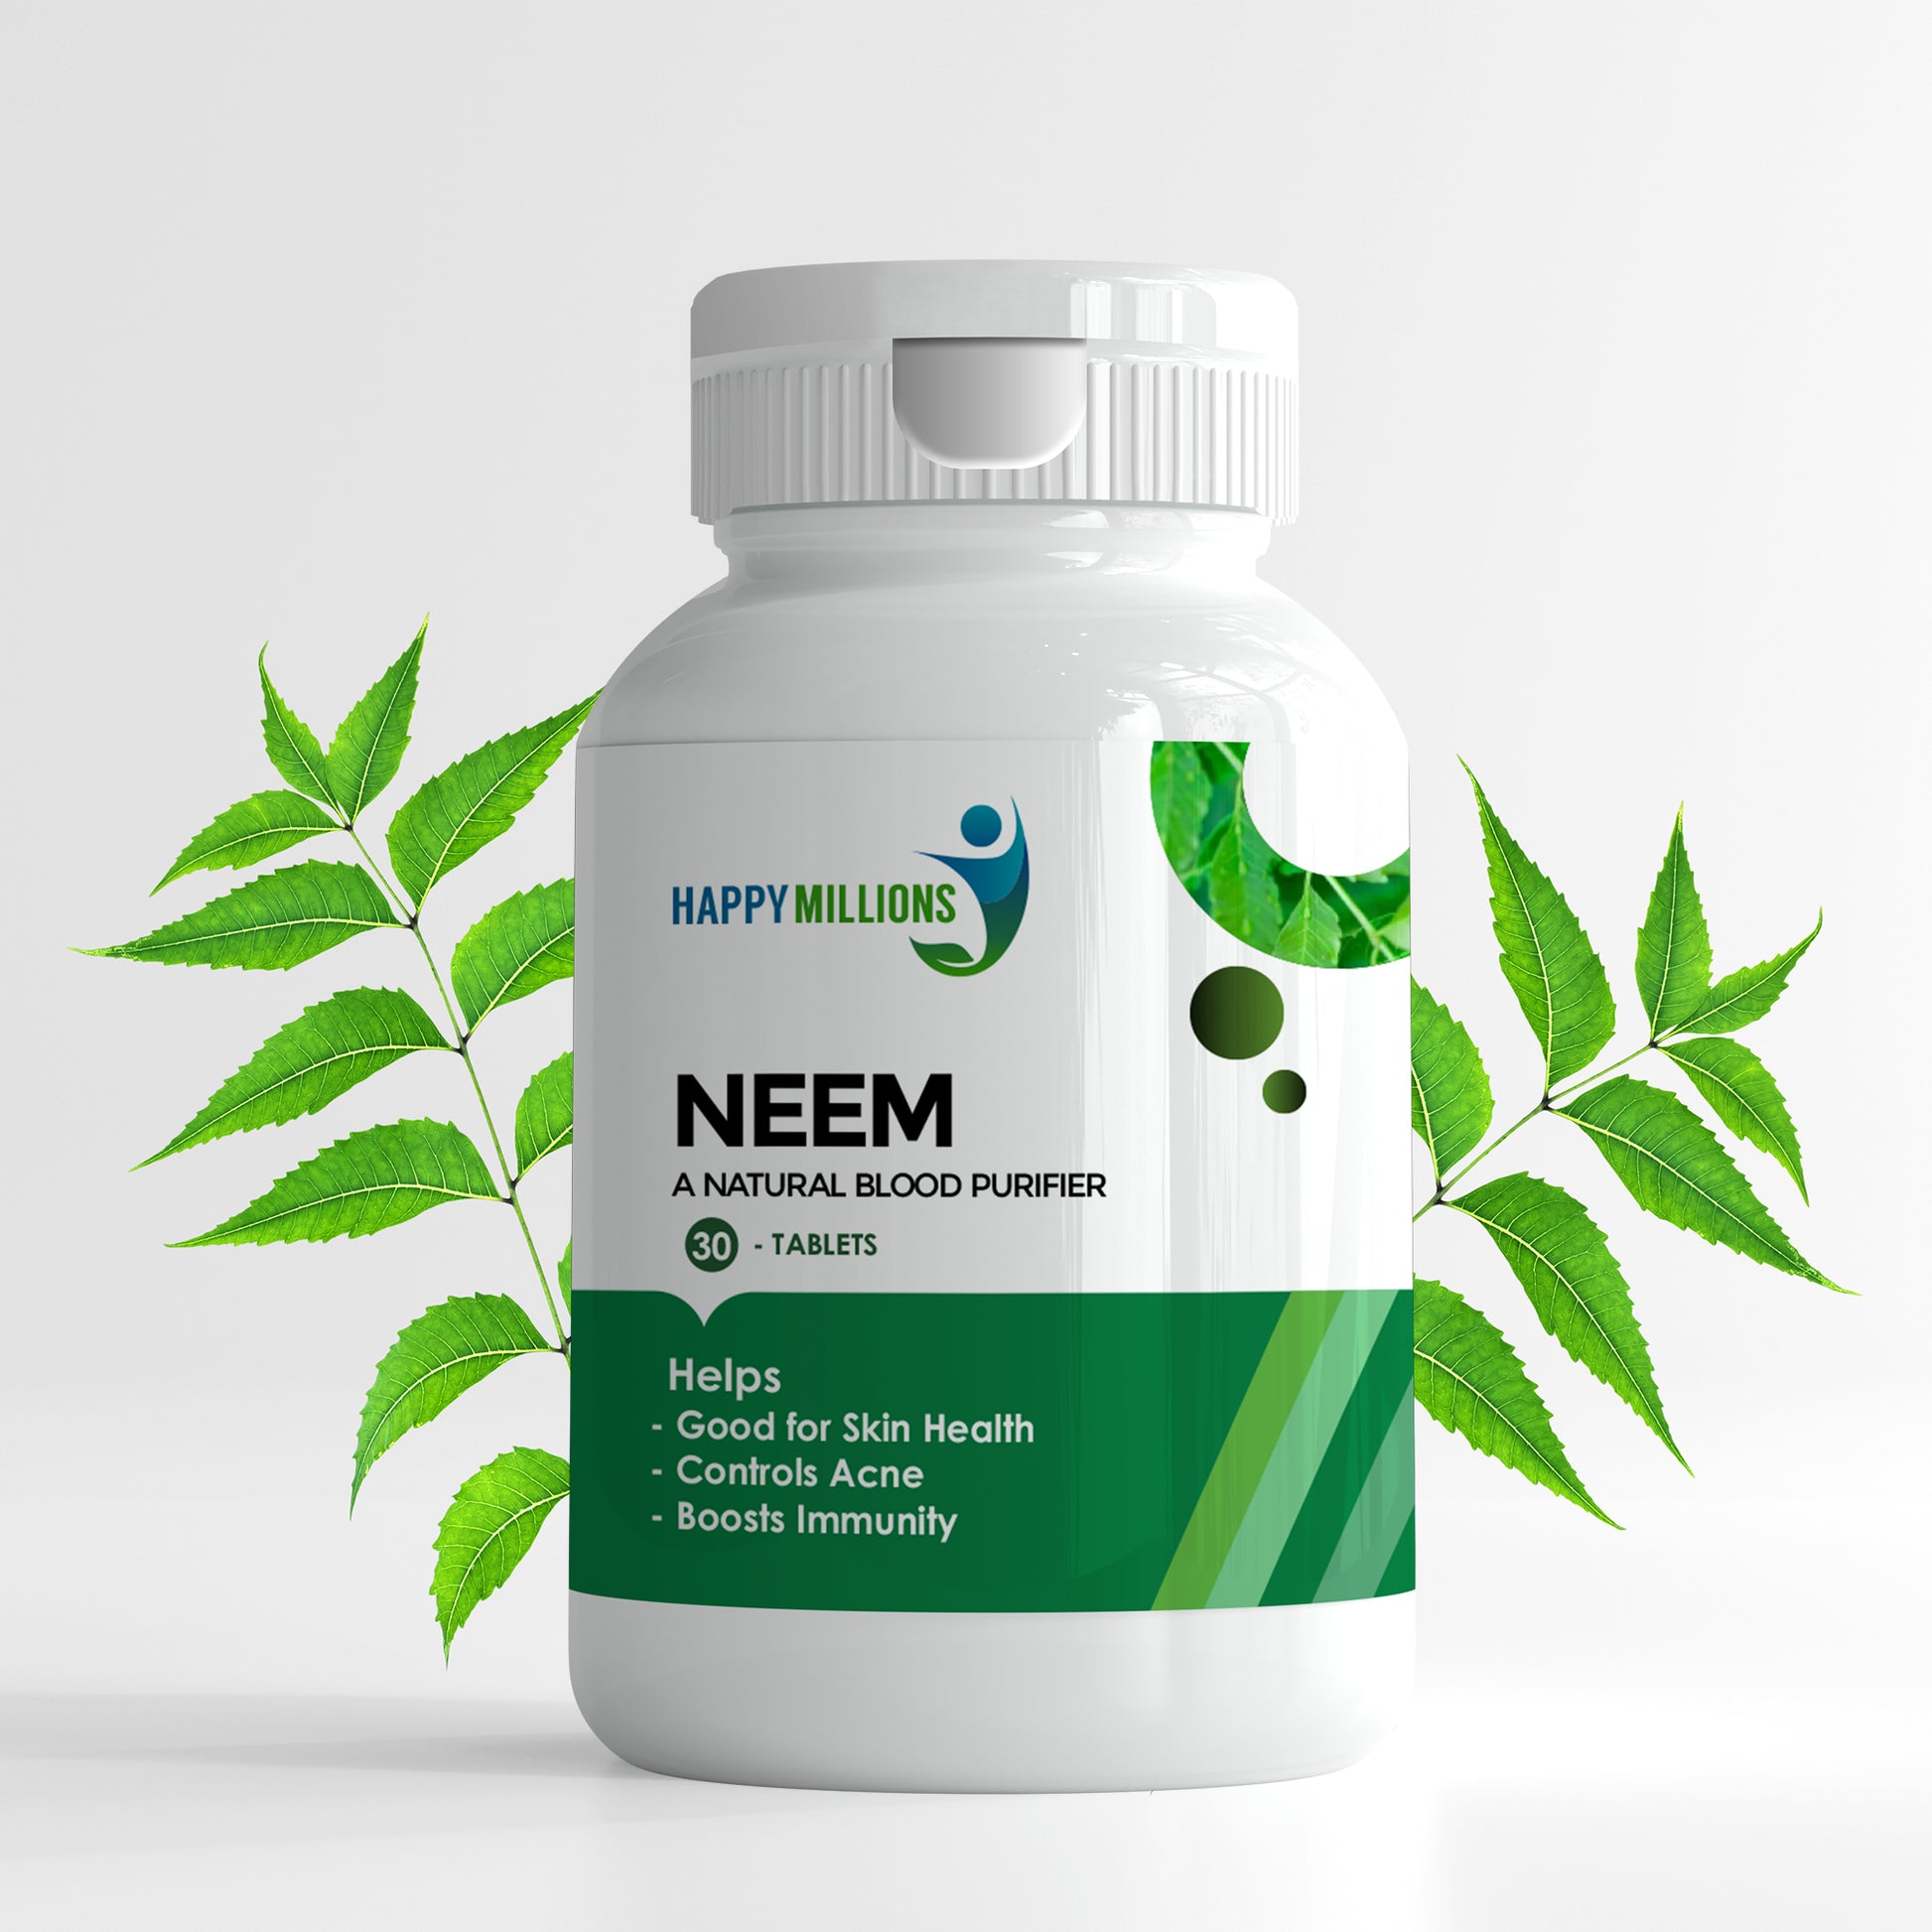 Explore the Power of Purity Happy Millions Neem Tablet Benefits for Skin Health and Detoxification, Enhanced.